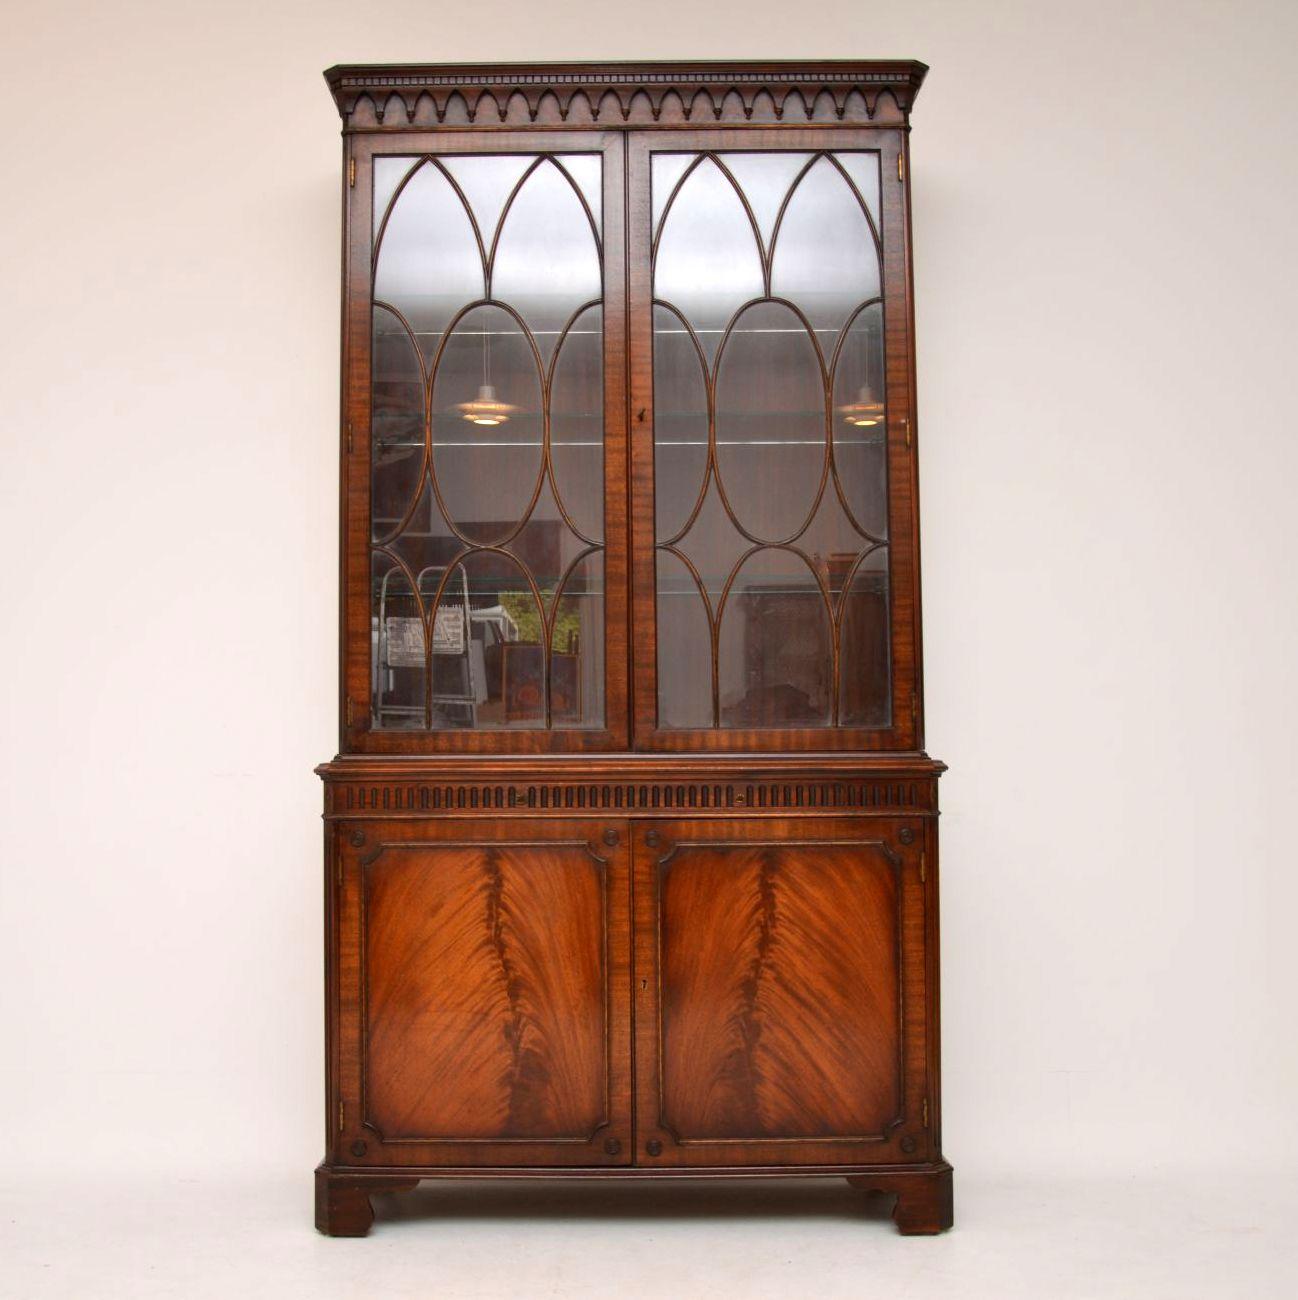 Large antique Georgian style mahogany display cabinet on cupboard dating from circa 1930-1950s period & in excellent condition. This cabinet has a dental cornice, with tear drop mouldings below. The top section has reeded canted corners & fine